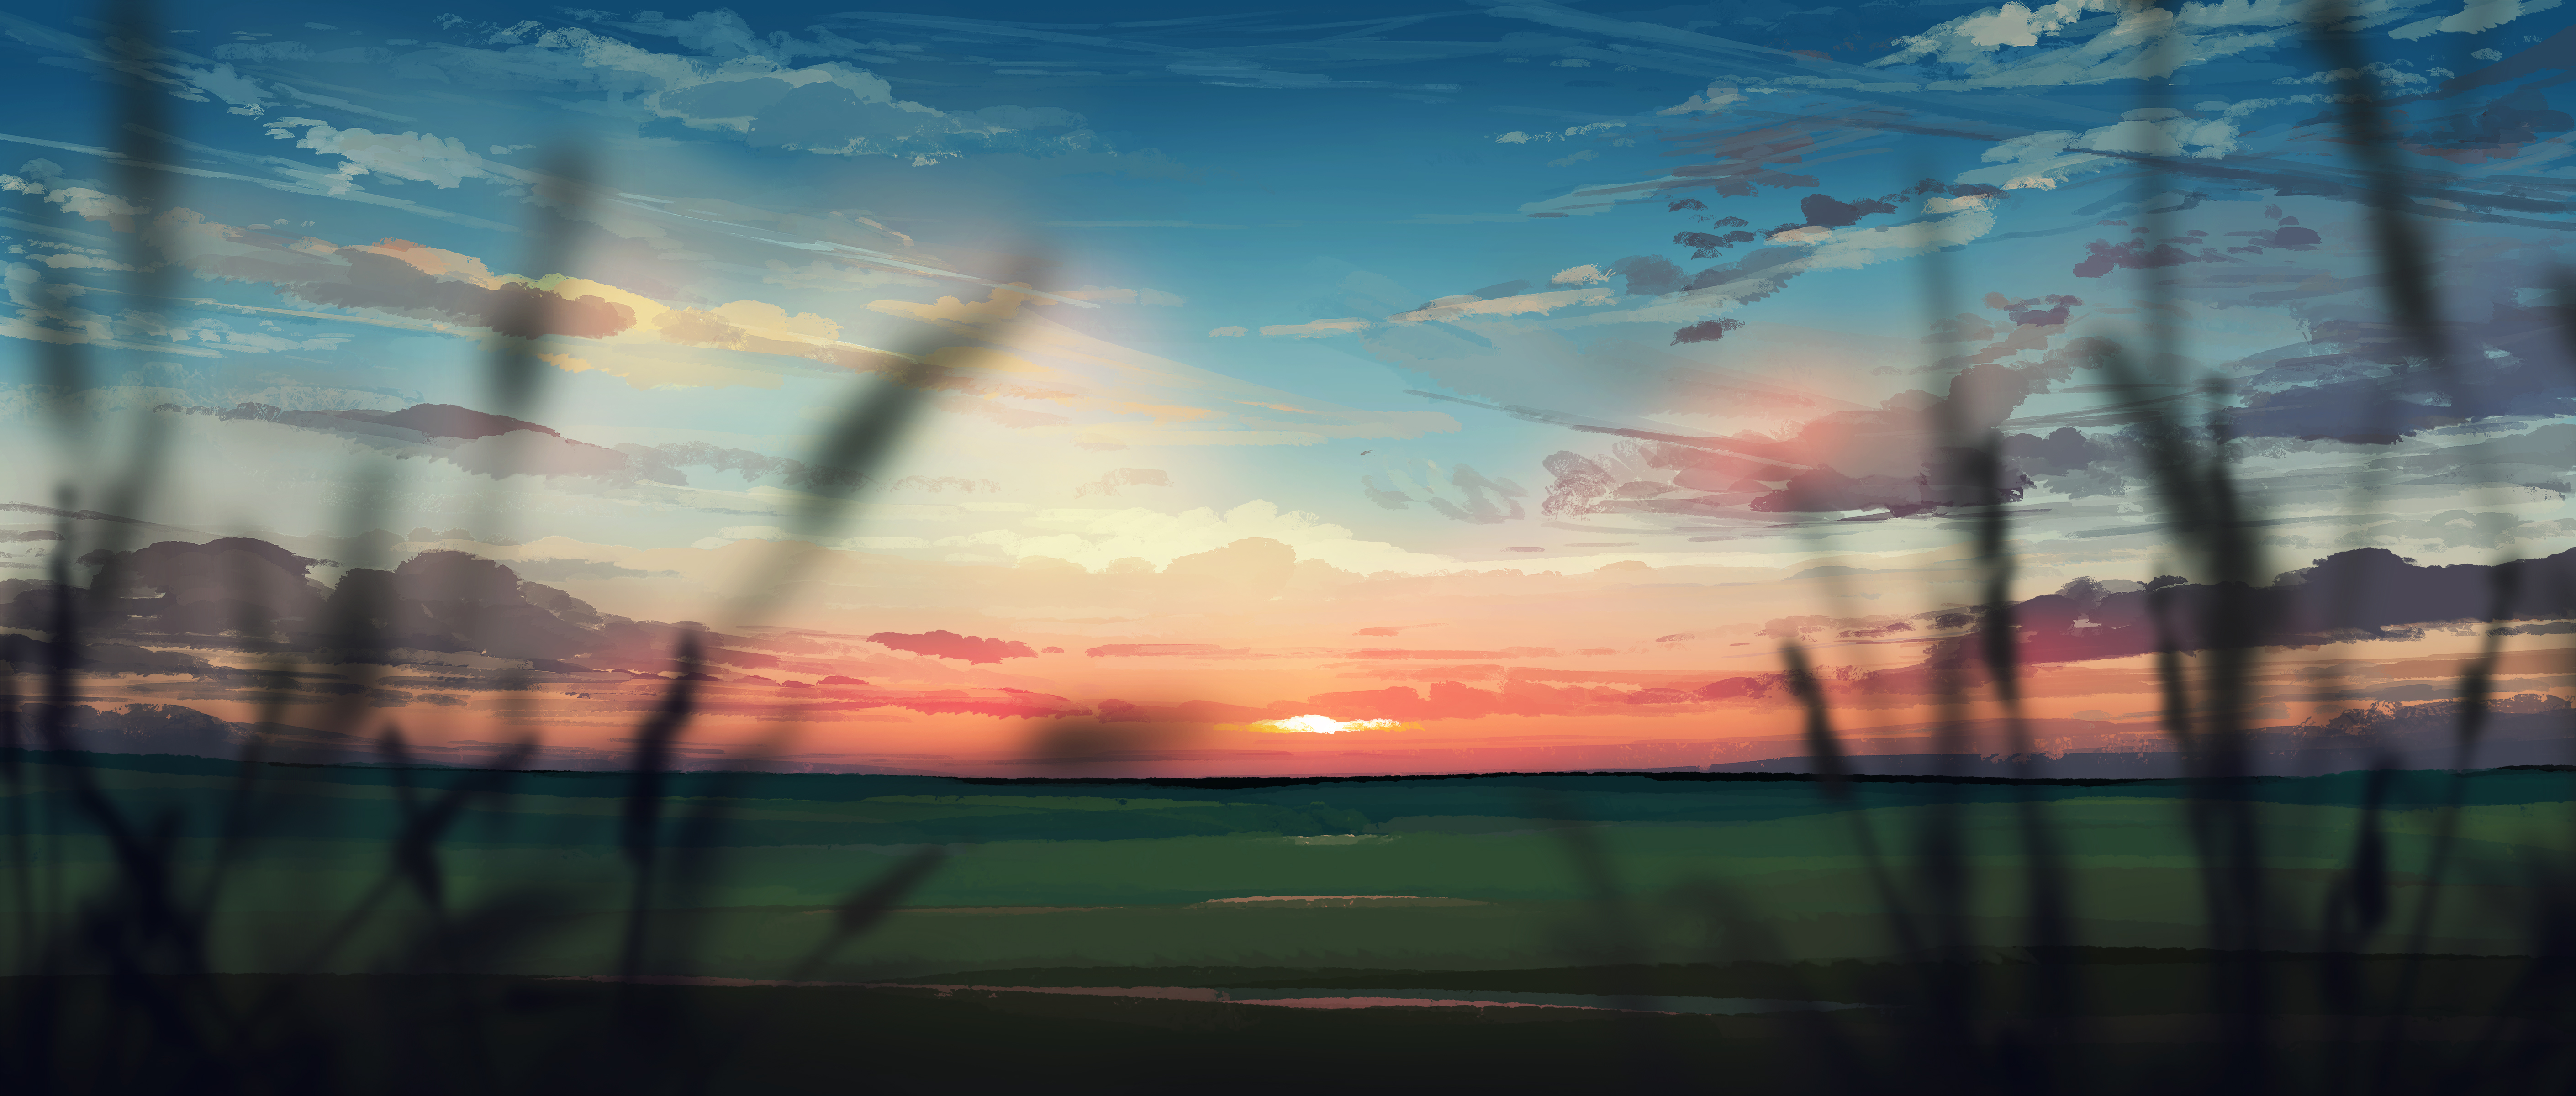 Artwork Anime Sky Clouds Red Clouds Grass Gracile 5640x2400